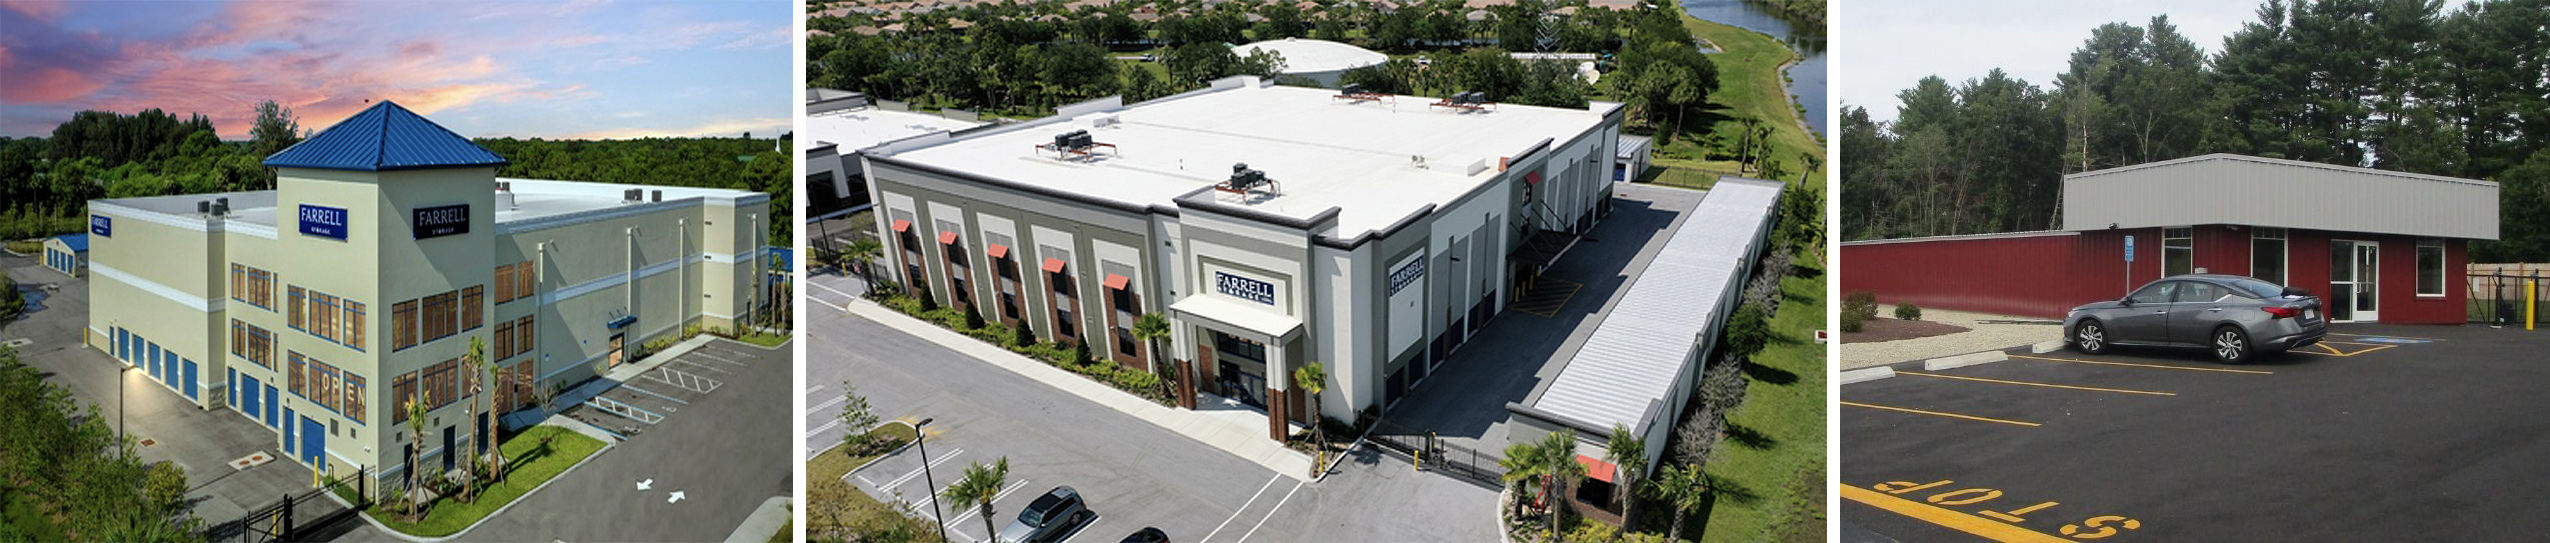 May 1 , 2021  Right Move Storage, LLC (“Right Move Storage”), headquartered in Houston, Texas announced this week that it has been awarded the management and leasing of a 4,000 unit Class “A” self-storage portfolio consisting of five properties located in Florida and Massachusetts. LandPark Advisors, LLC (“LandPark”), an affiliate of Right Move Storage, will oversee operations and provide advisory services. The properties are owned and developed by Farrell Storage. This brings the total number of units unde